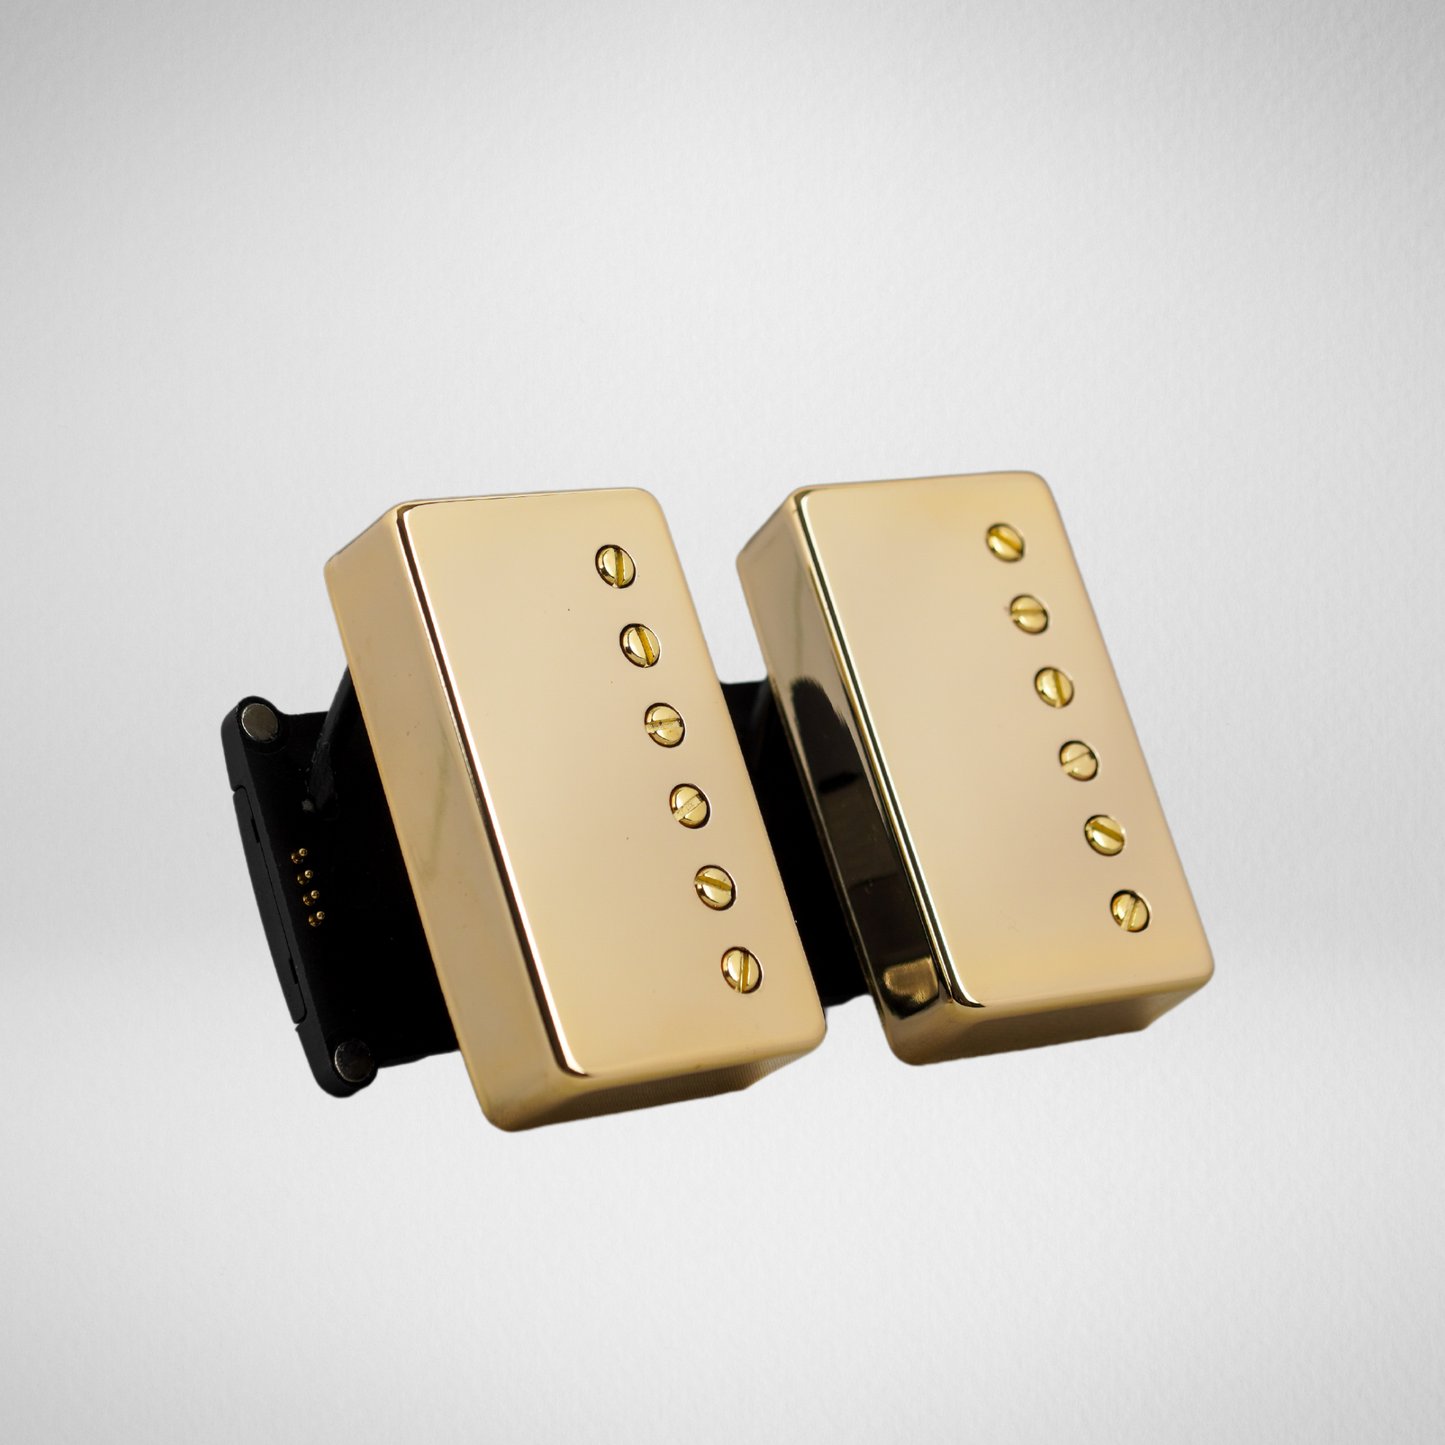 Spot Humbuckers with Guitar-X Pickup Swapping Mounts